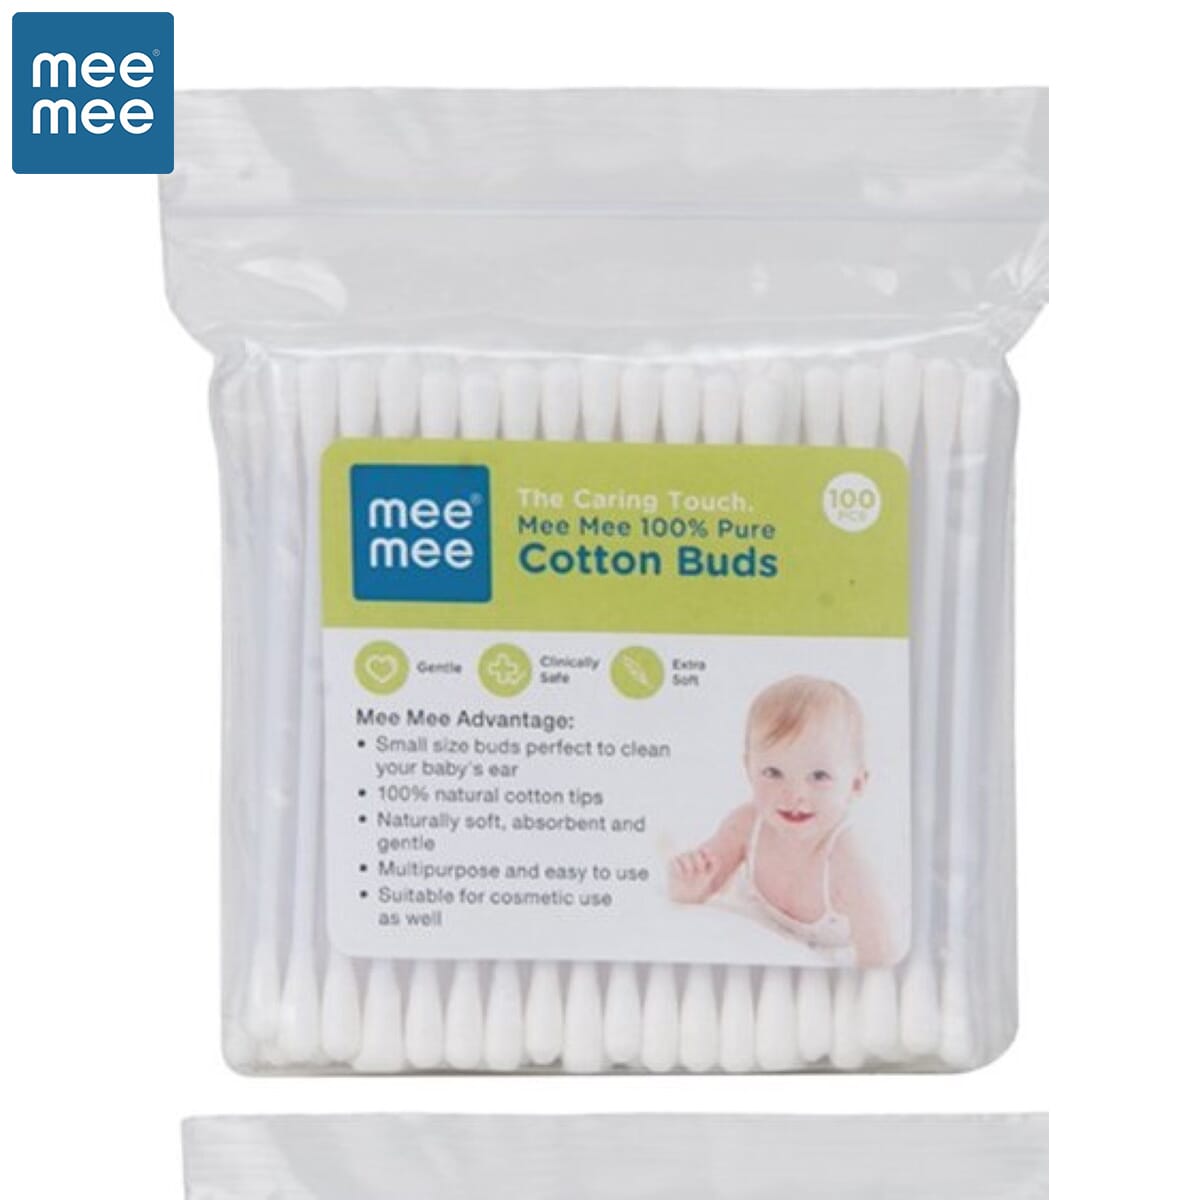 Mee Mee 100% Pure Ultra Thin Cotton Buds (White) (100 Pieces per